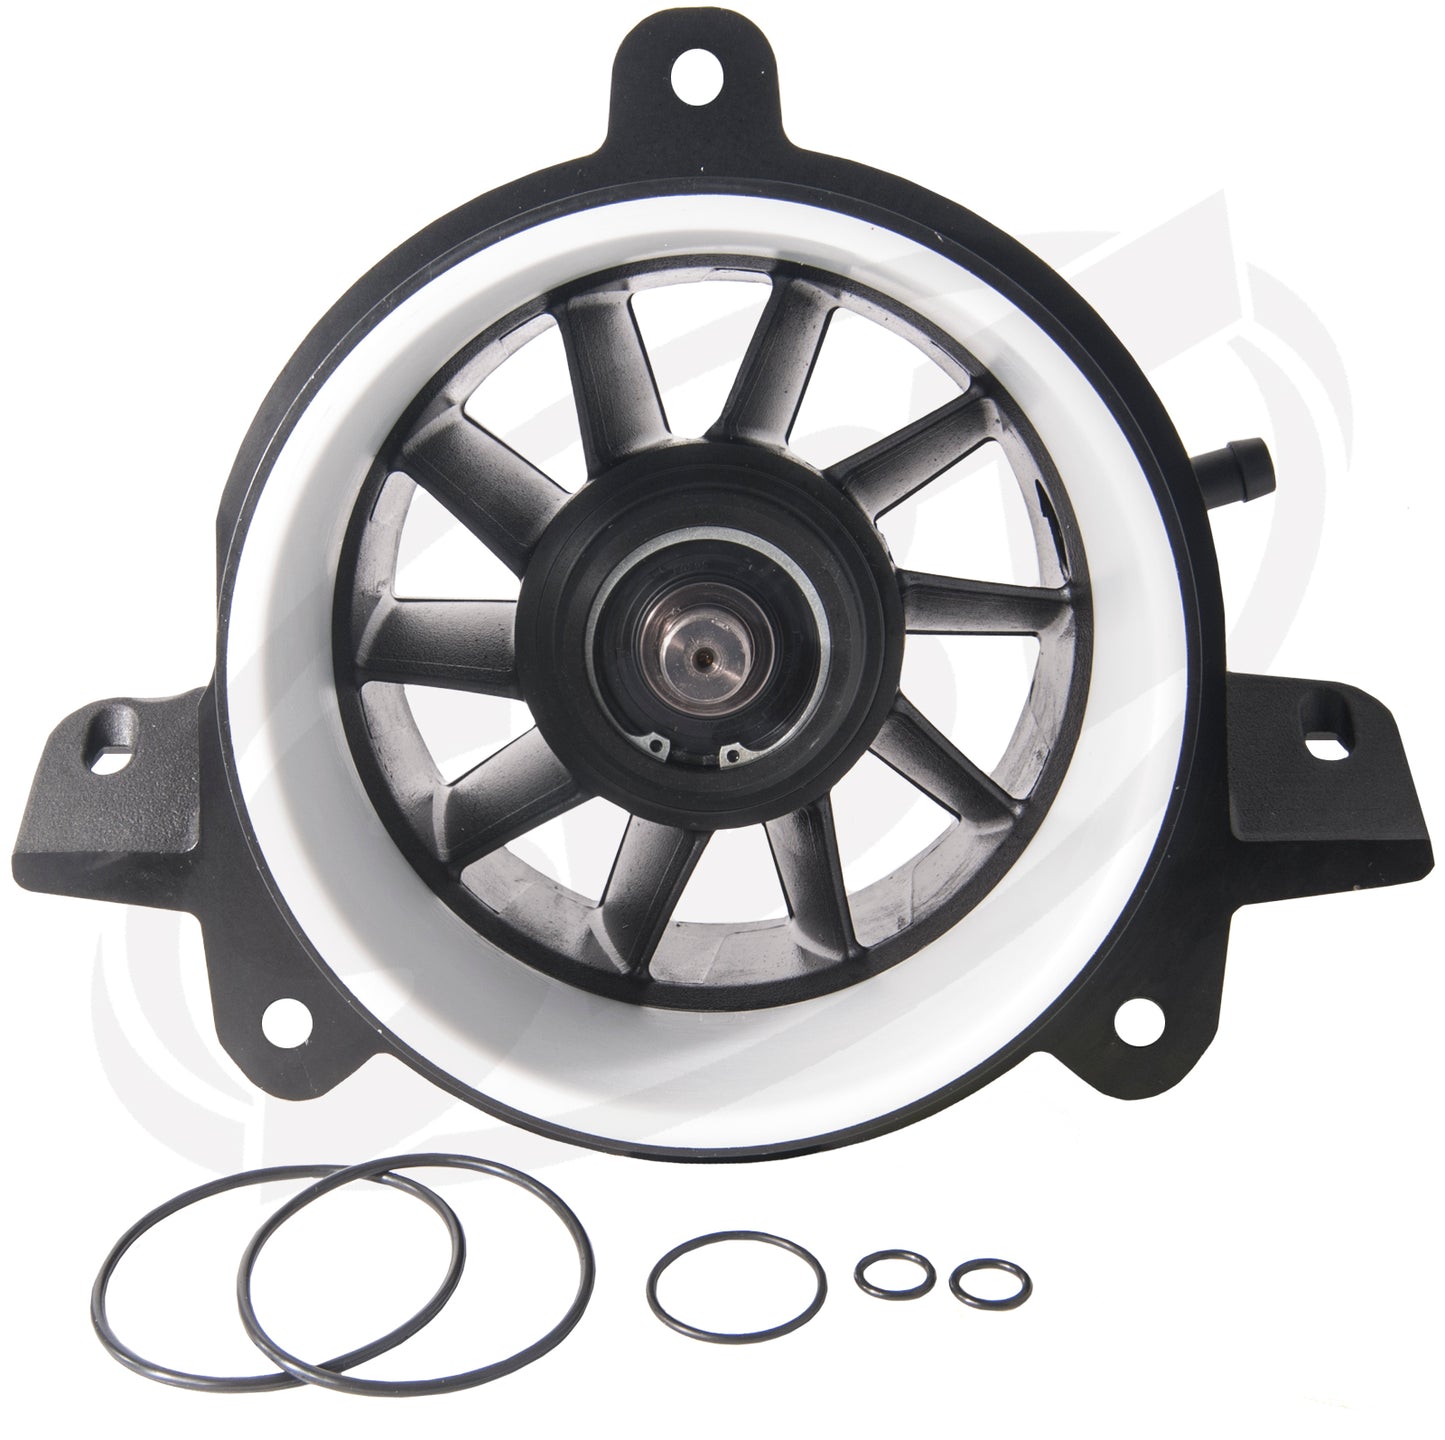 SBT Sea-Doo 4-Tec with 159mm 2009 & up exc GTX155 Jet Pump Assembly GTX /RXT /Wake Pro 2009 2010 2011 2012